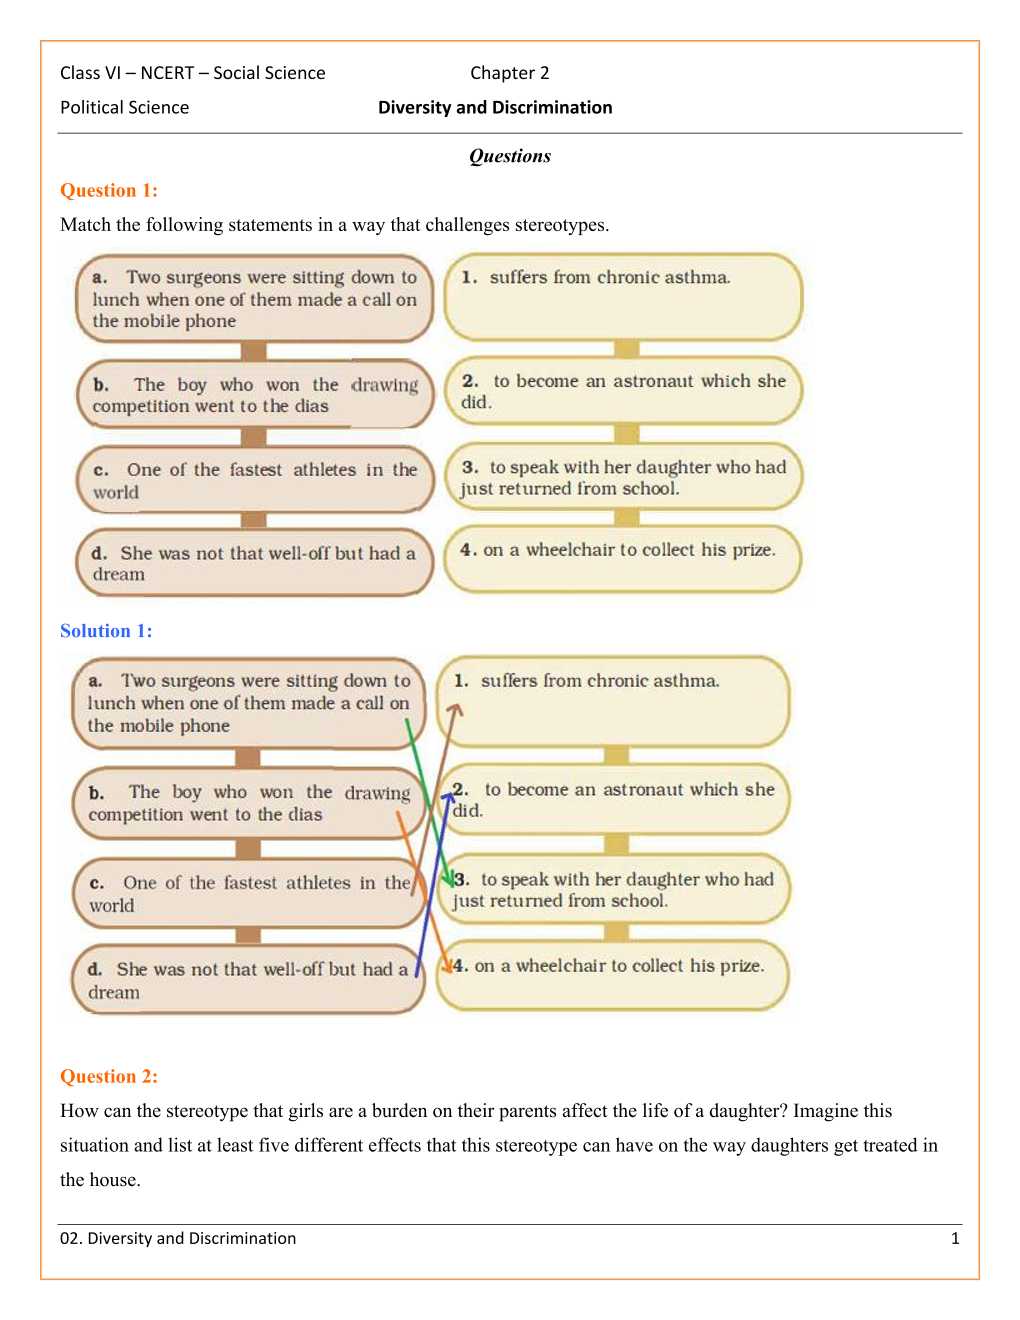 NCERT Solutions For Class 6 Social Science - Social and Political Life Chapter 2